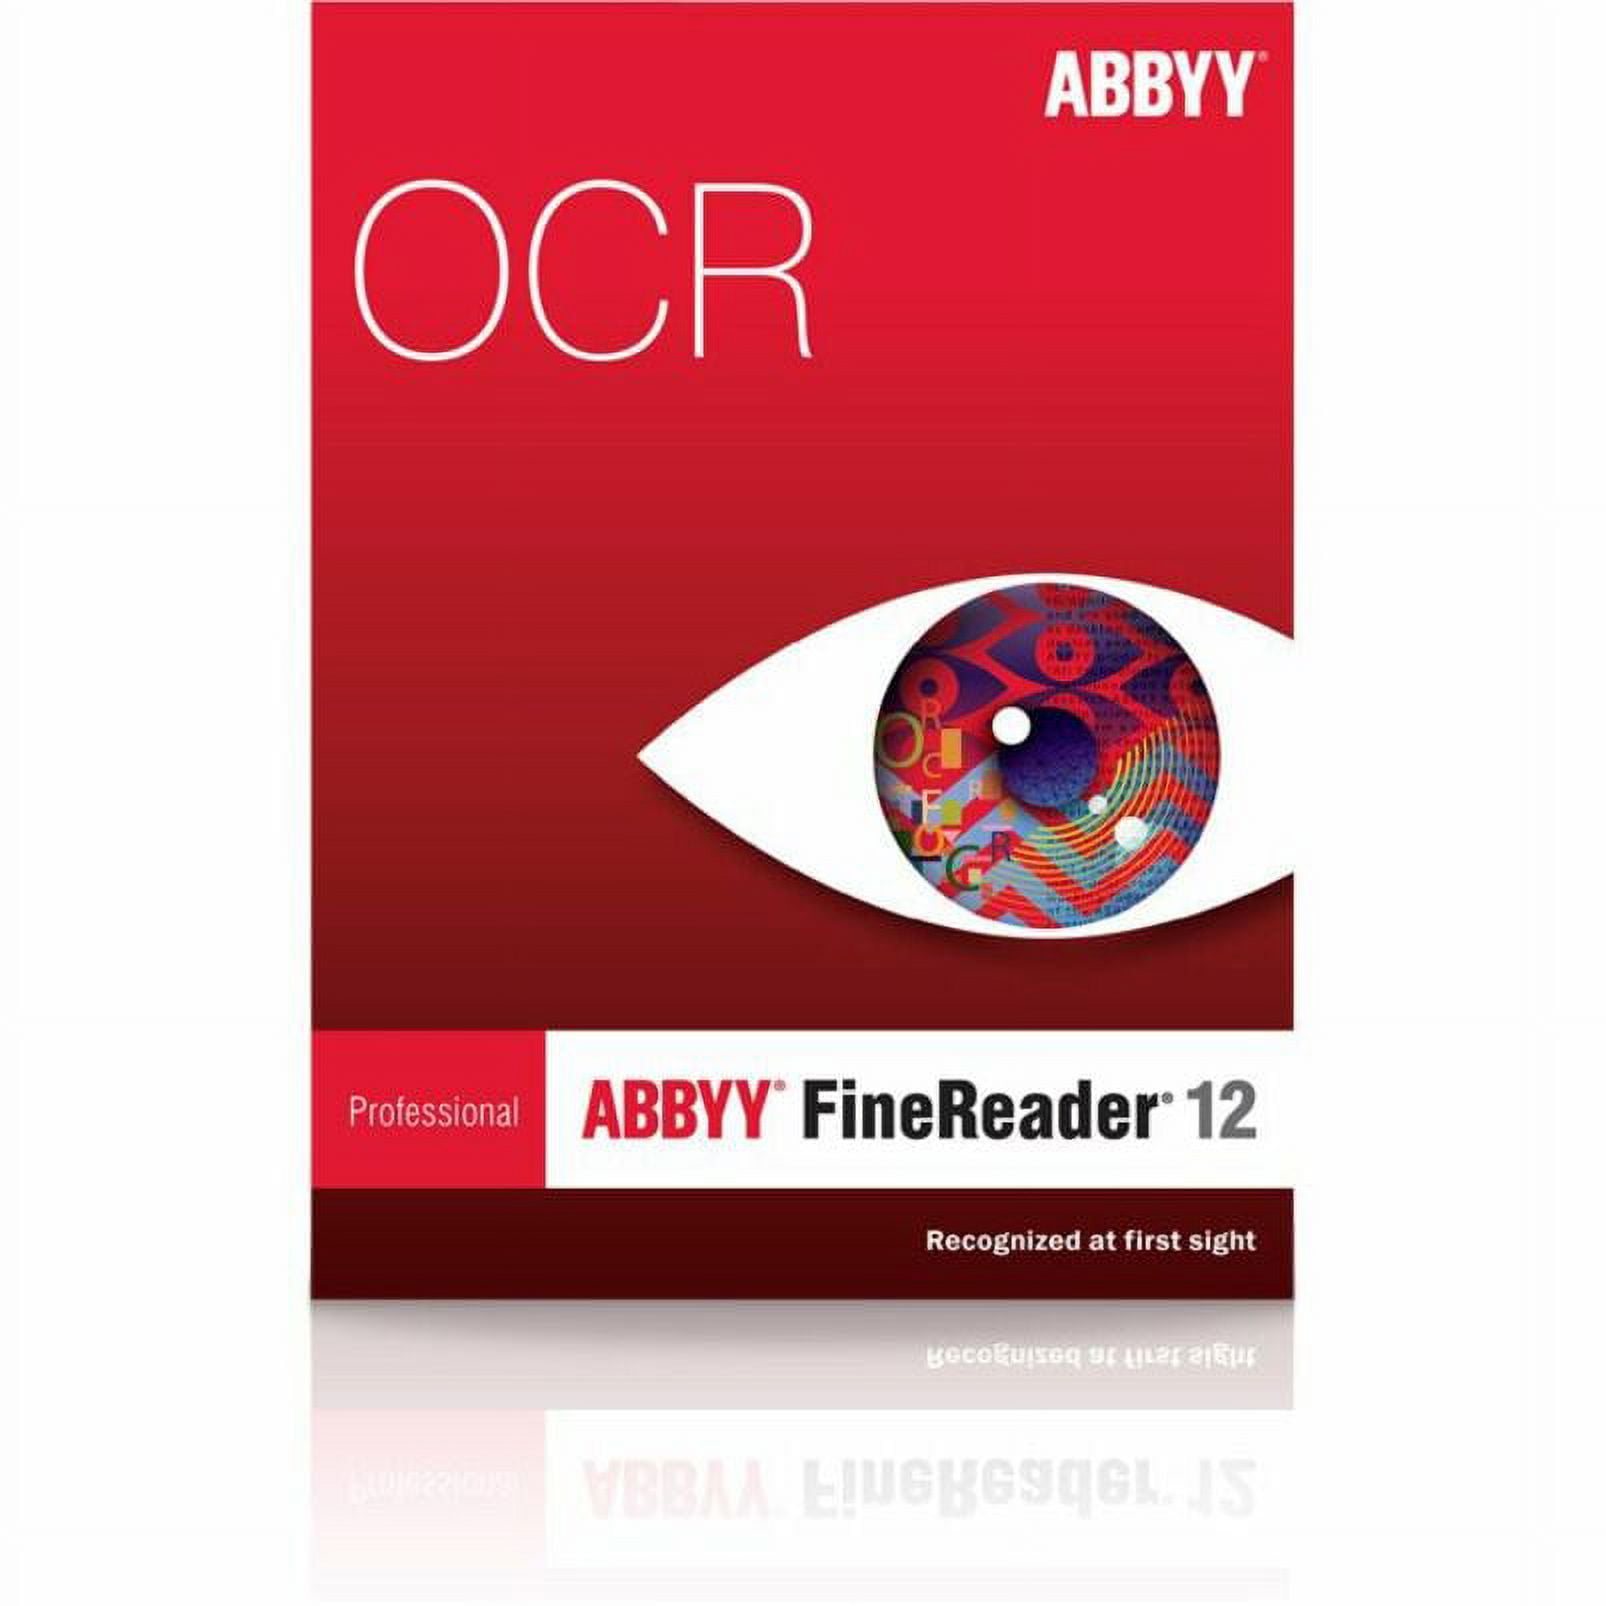 ABBYY FineReader v.12.0 Professional Edition, Upgrade Package, 1 User,  Standard, Box Packing 